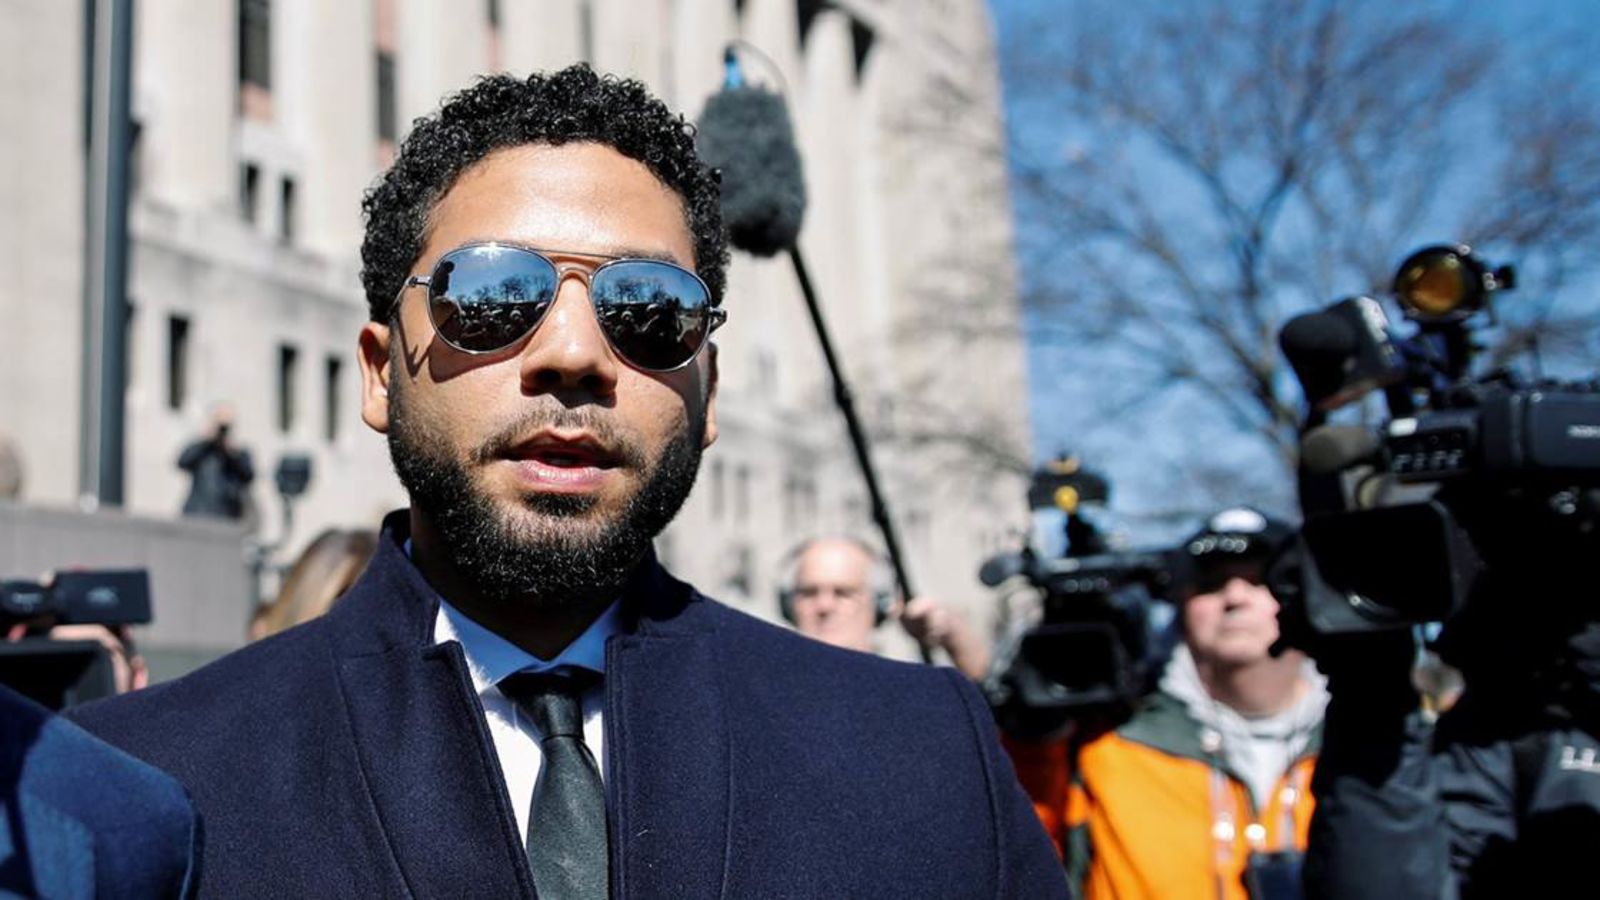 Illustration for article titled Jussie Smollet, all charges dropped - WTH?!